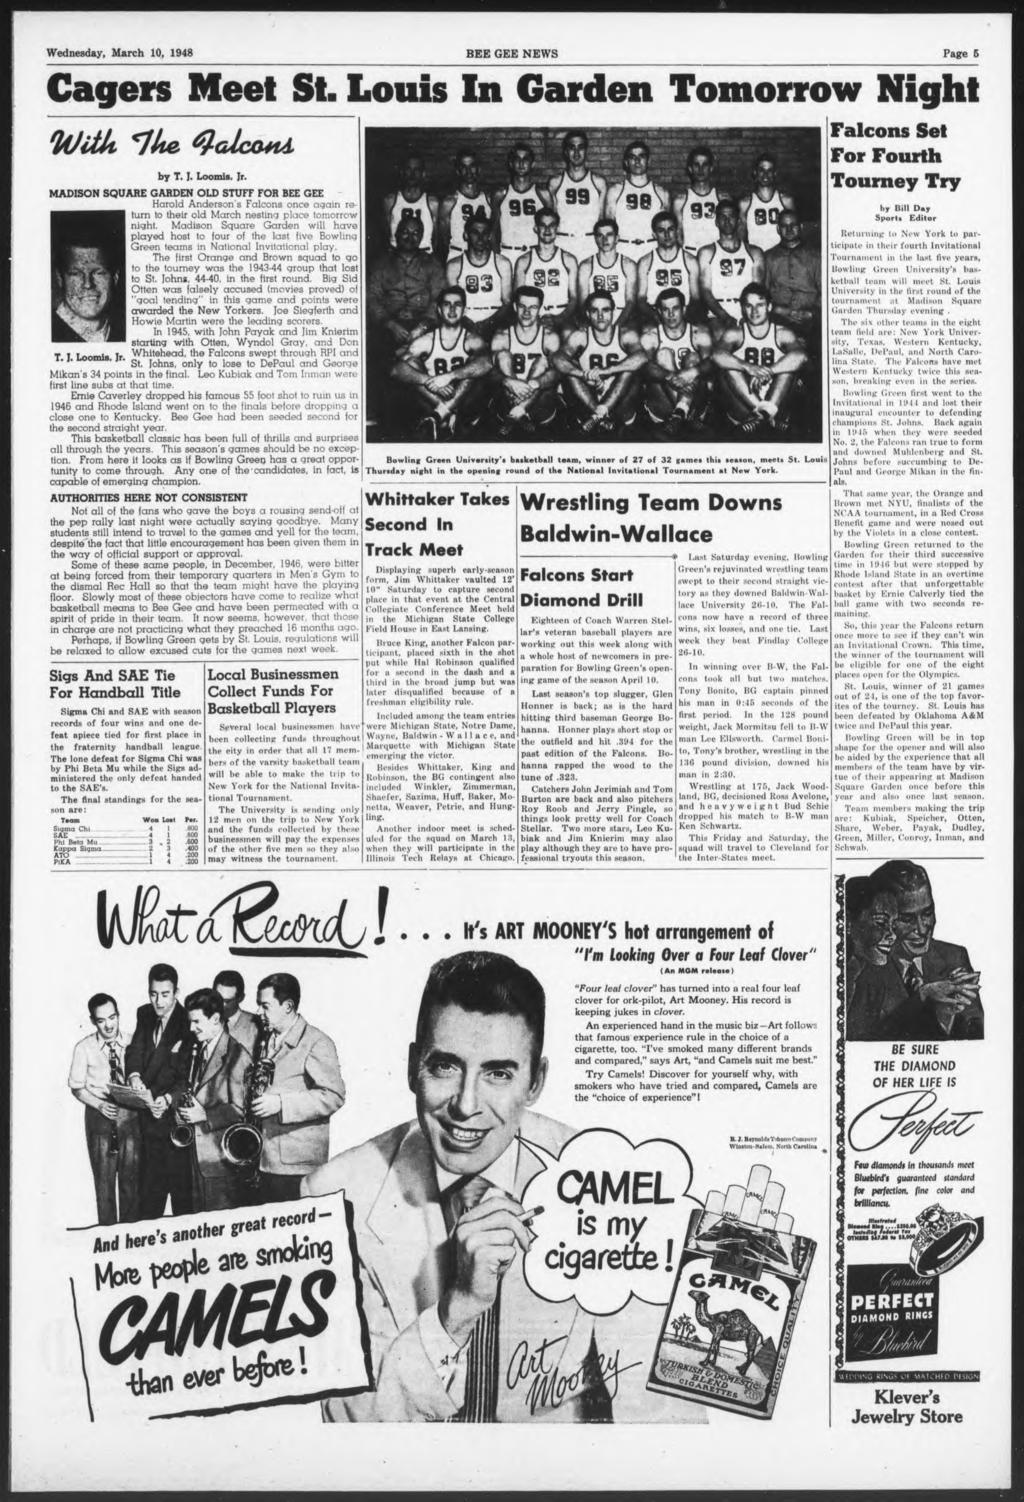 Wednesday, March 10, 1948 BEE GEE NEWS Page 6 Cagers Meet St. Louis In Garden Tomorrow Night WUU "lite. QalcotU T. I. Loomia. Jr.